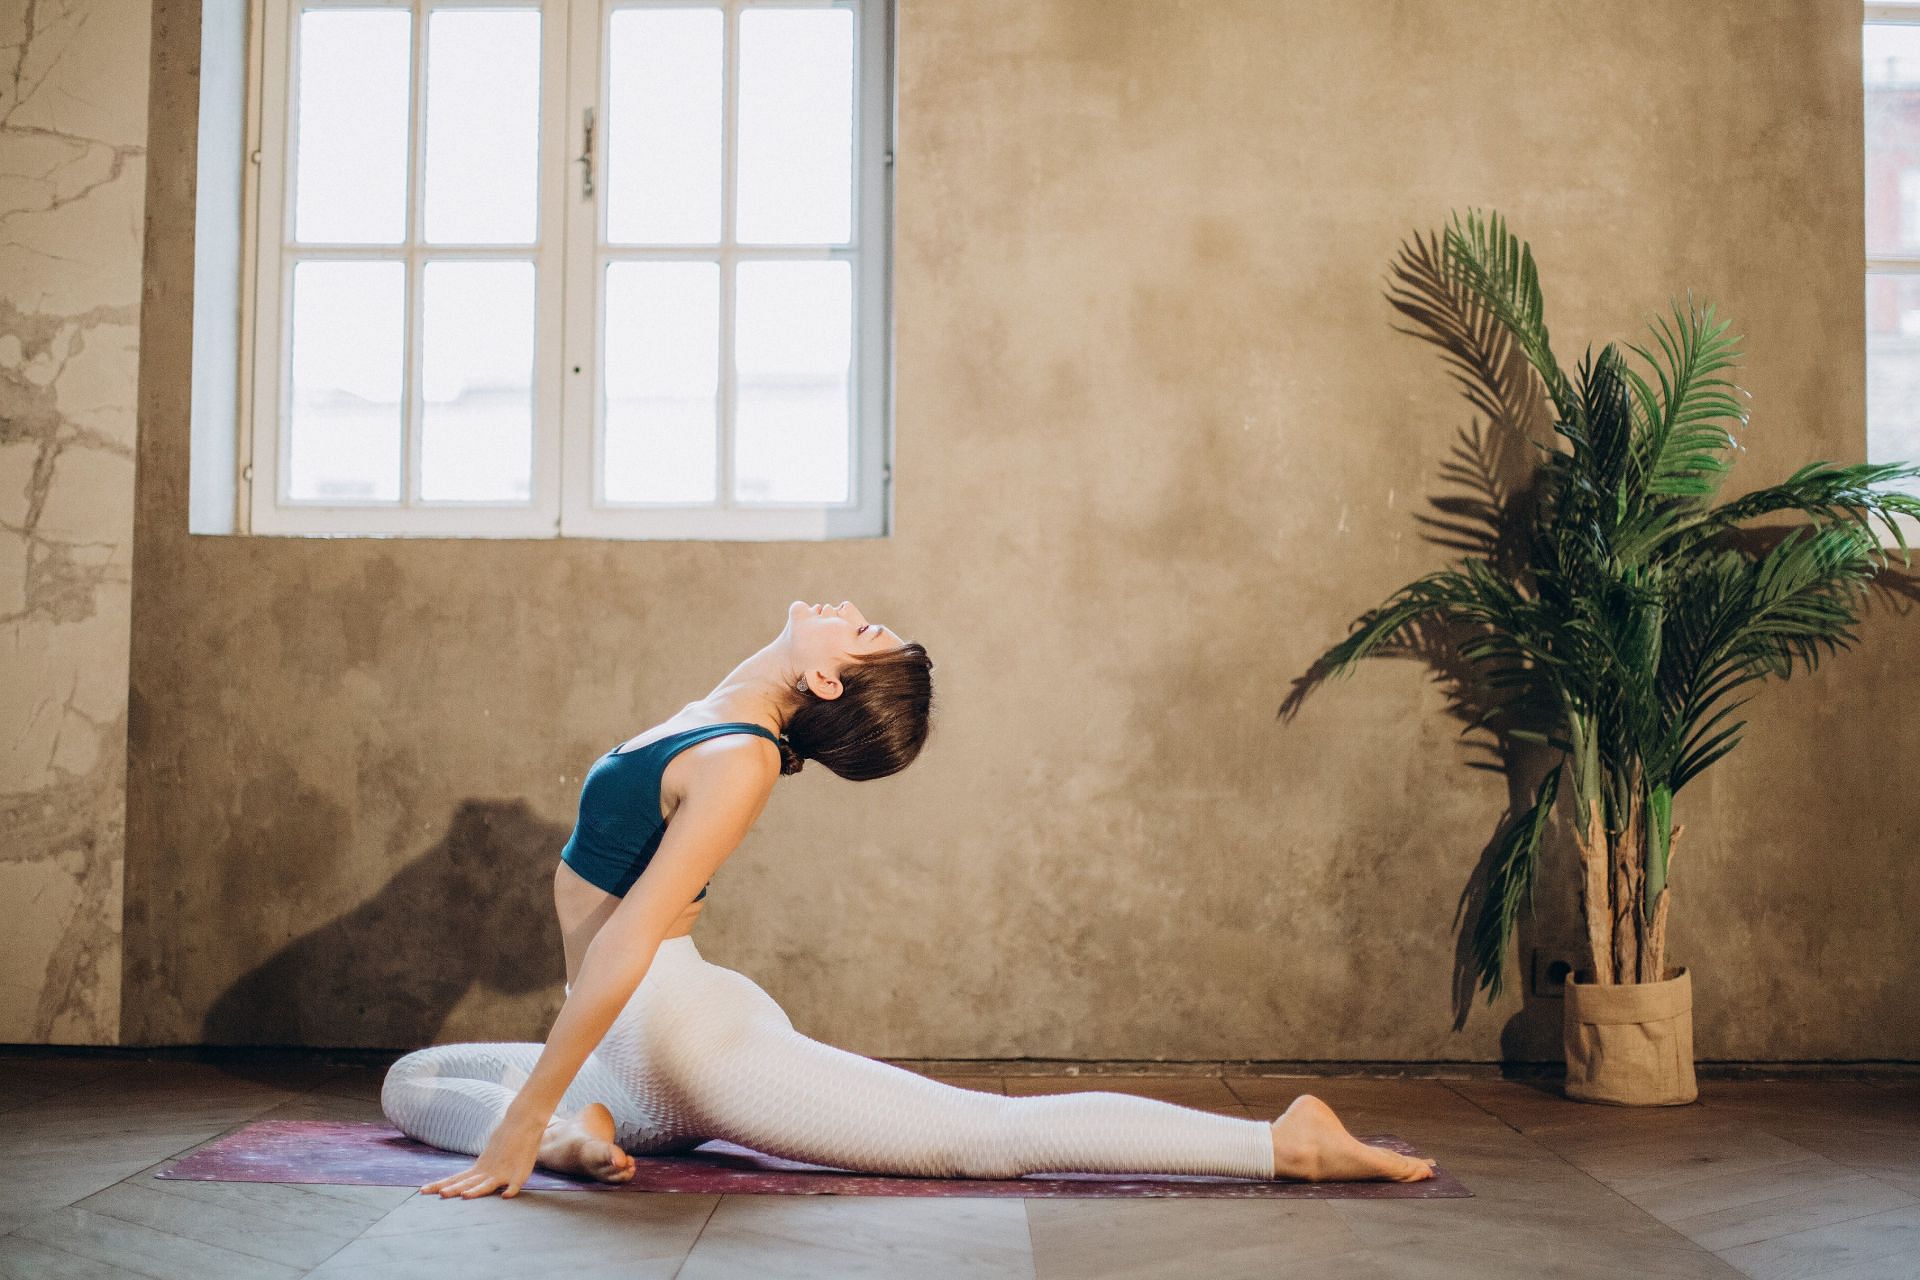 Five Minutes? Five Foundational Poses to Freshen Up By Steph